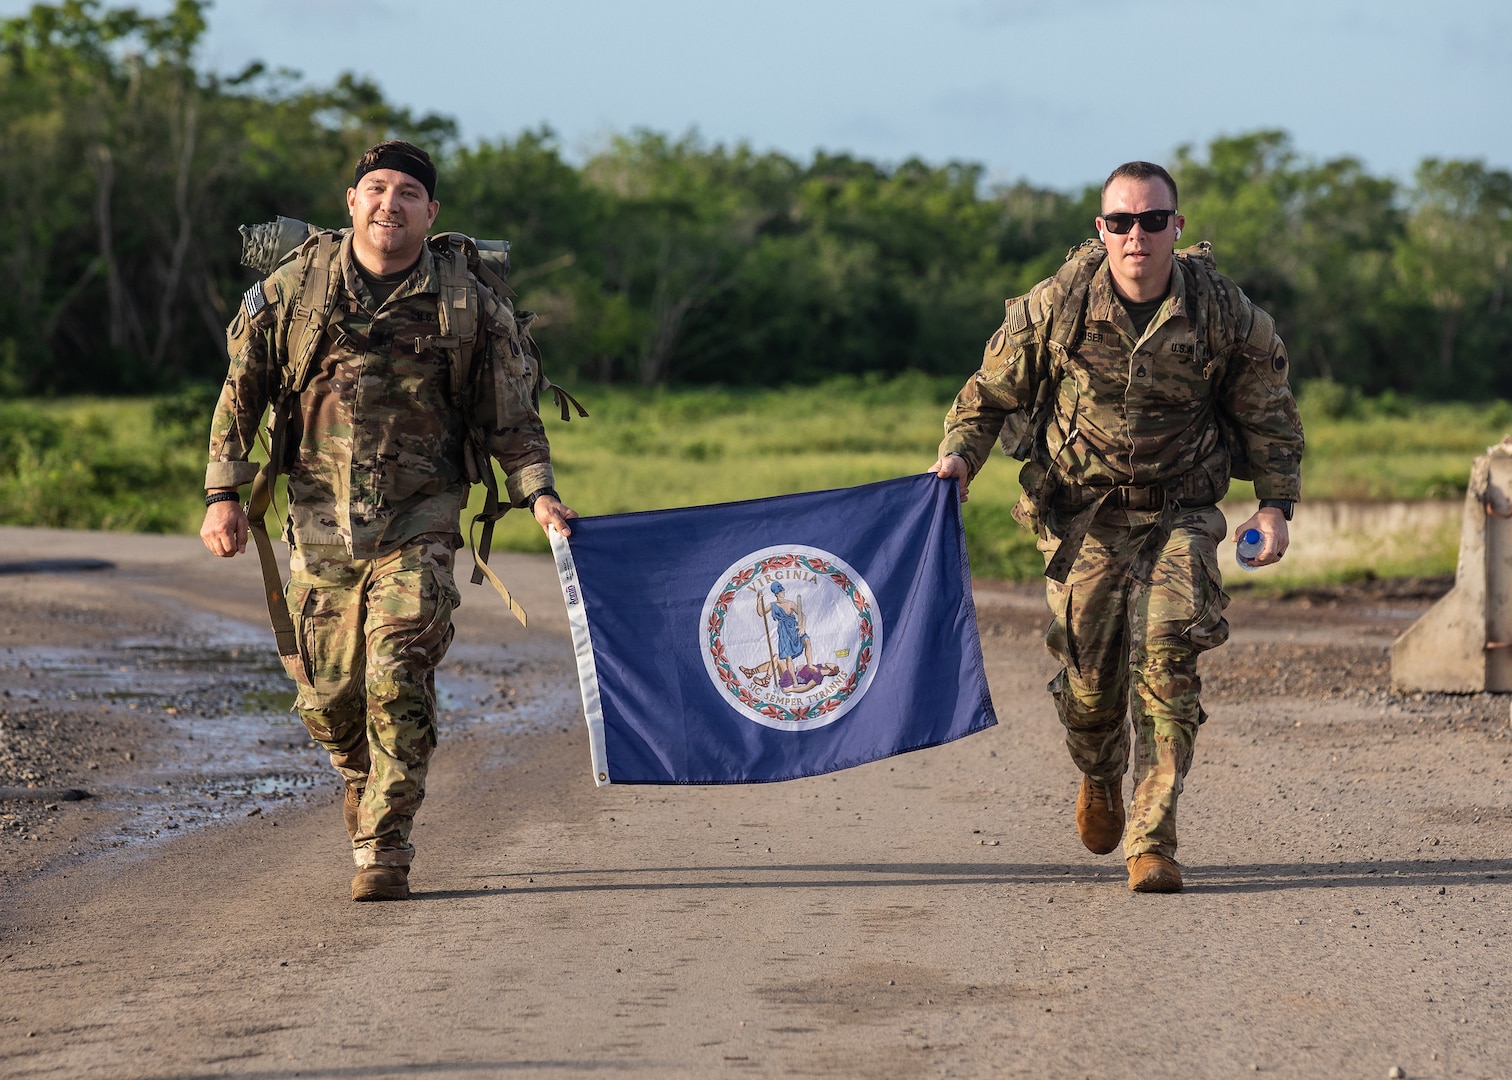 Fifty-seven Soldiers and Airmen assigned to Combined Joint Task Force-Horn of Africa earned the GAFPB July 4-5, 2022, at Camp Simba, Kenya. The badge is a test of physical fitness and shooting proficiency with three levels of the award that can be earned: gold, silver, and bronze. It is a decoration of the Bundeswehr, the Armed Forces of the Federal Republic of Germany. (U.S. Army National Guard photo by Staff Sgt. Jeff Clements)